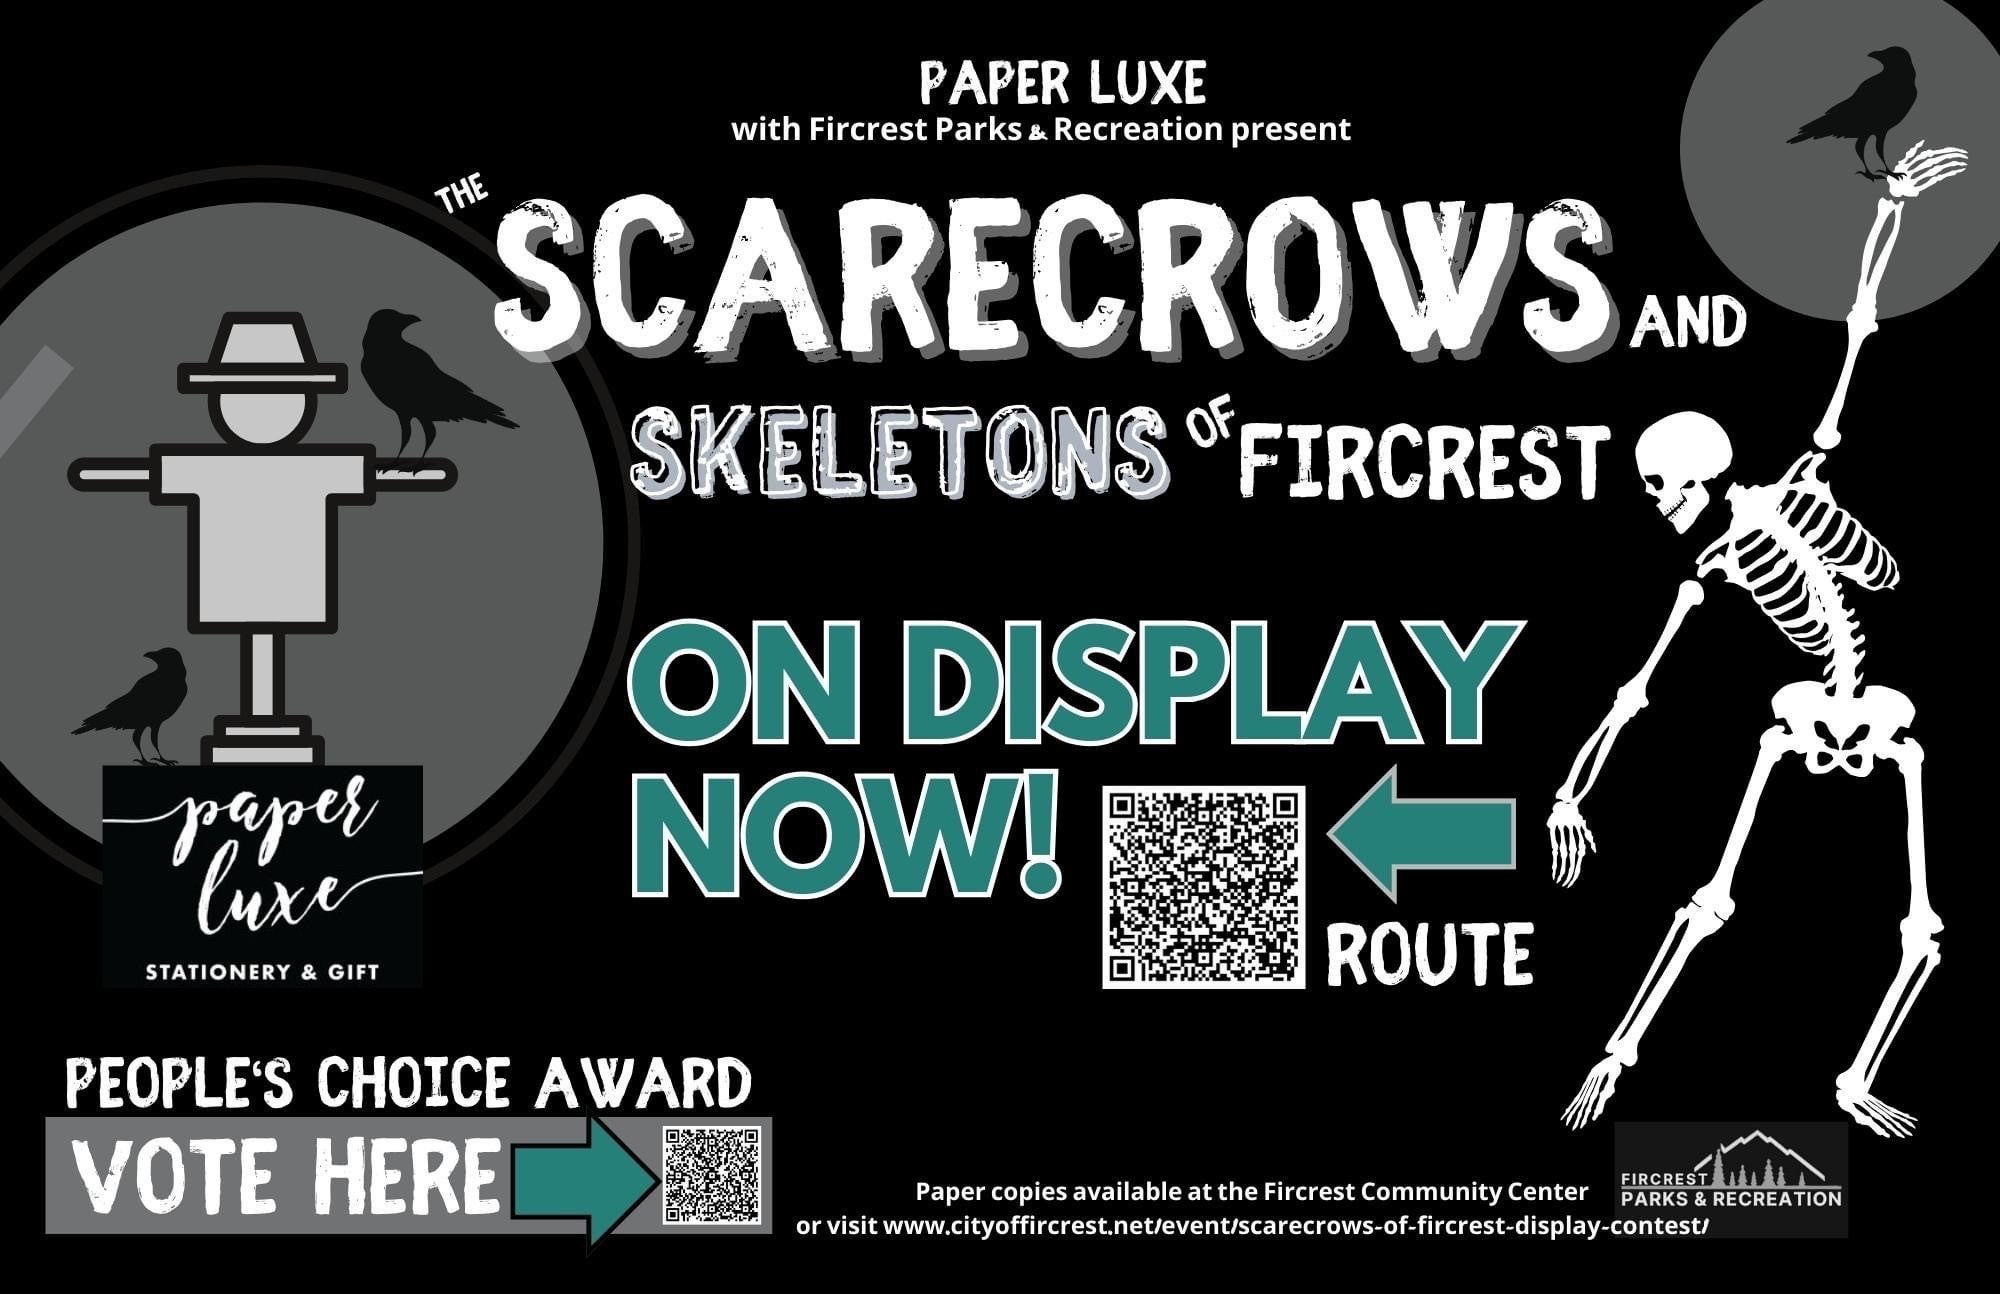 Poster for the Scarecrows and Skeletons of Fircrest Display Contest, with a skeleton, scarecrow and crows, On display now QR code, and Peoples choice award Vote Here QR code. Paper Luxe Stationery and gift sponsor, paper copies available at community center.